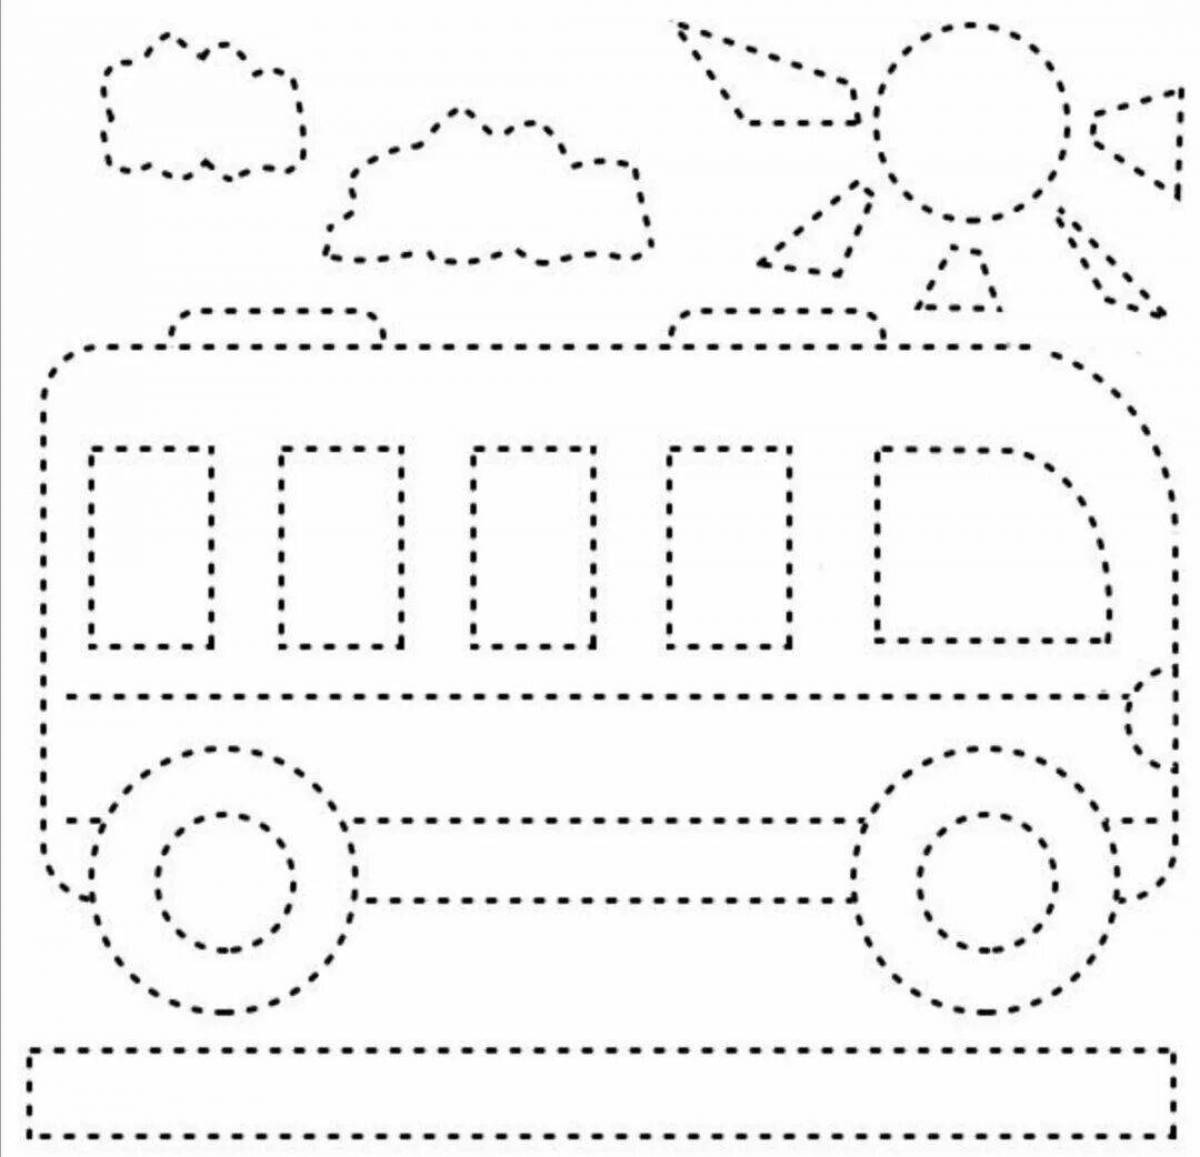 Creative coloring pages for 4-5 year olds